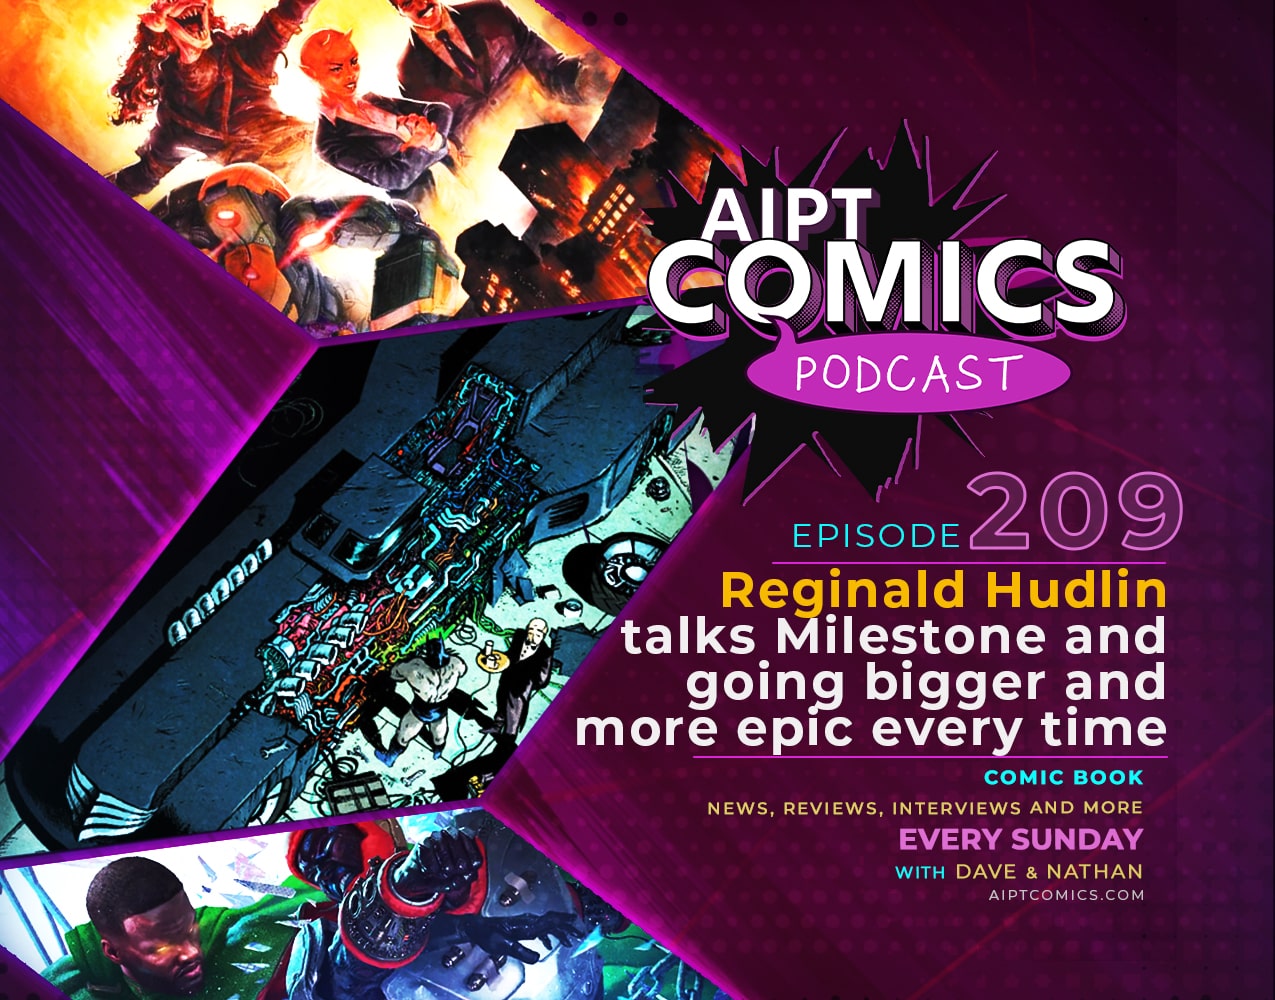 AIPT Comics Podcast episode 209: Reginald Hudlin talks Milestone and going bigger and more epic every time